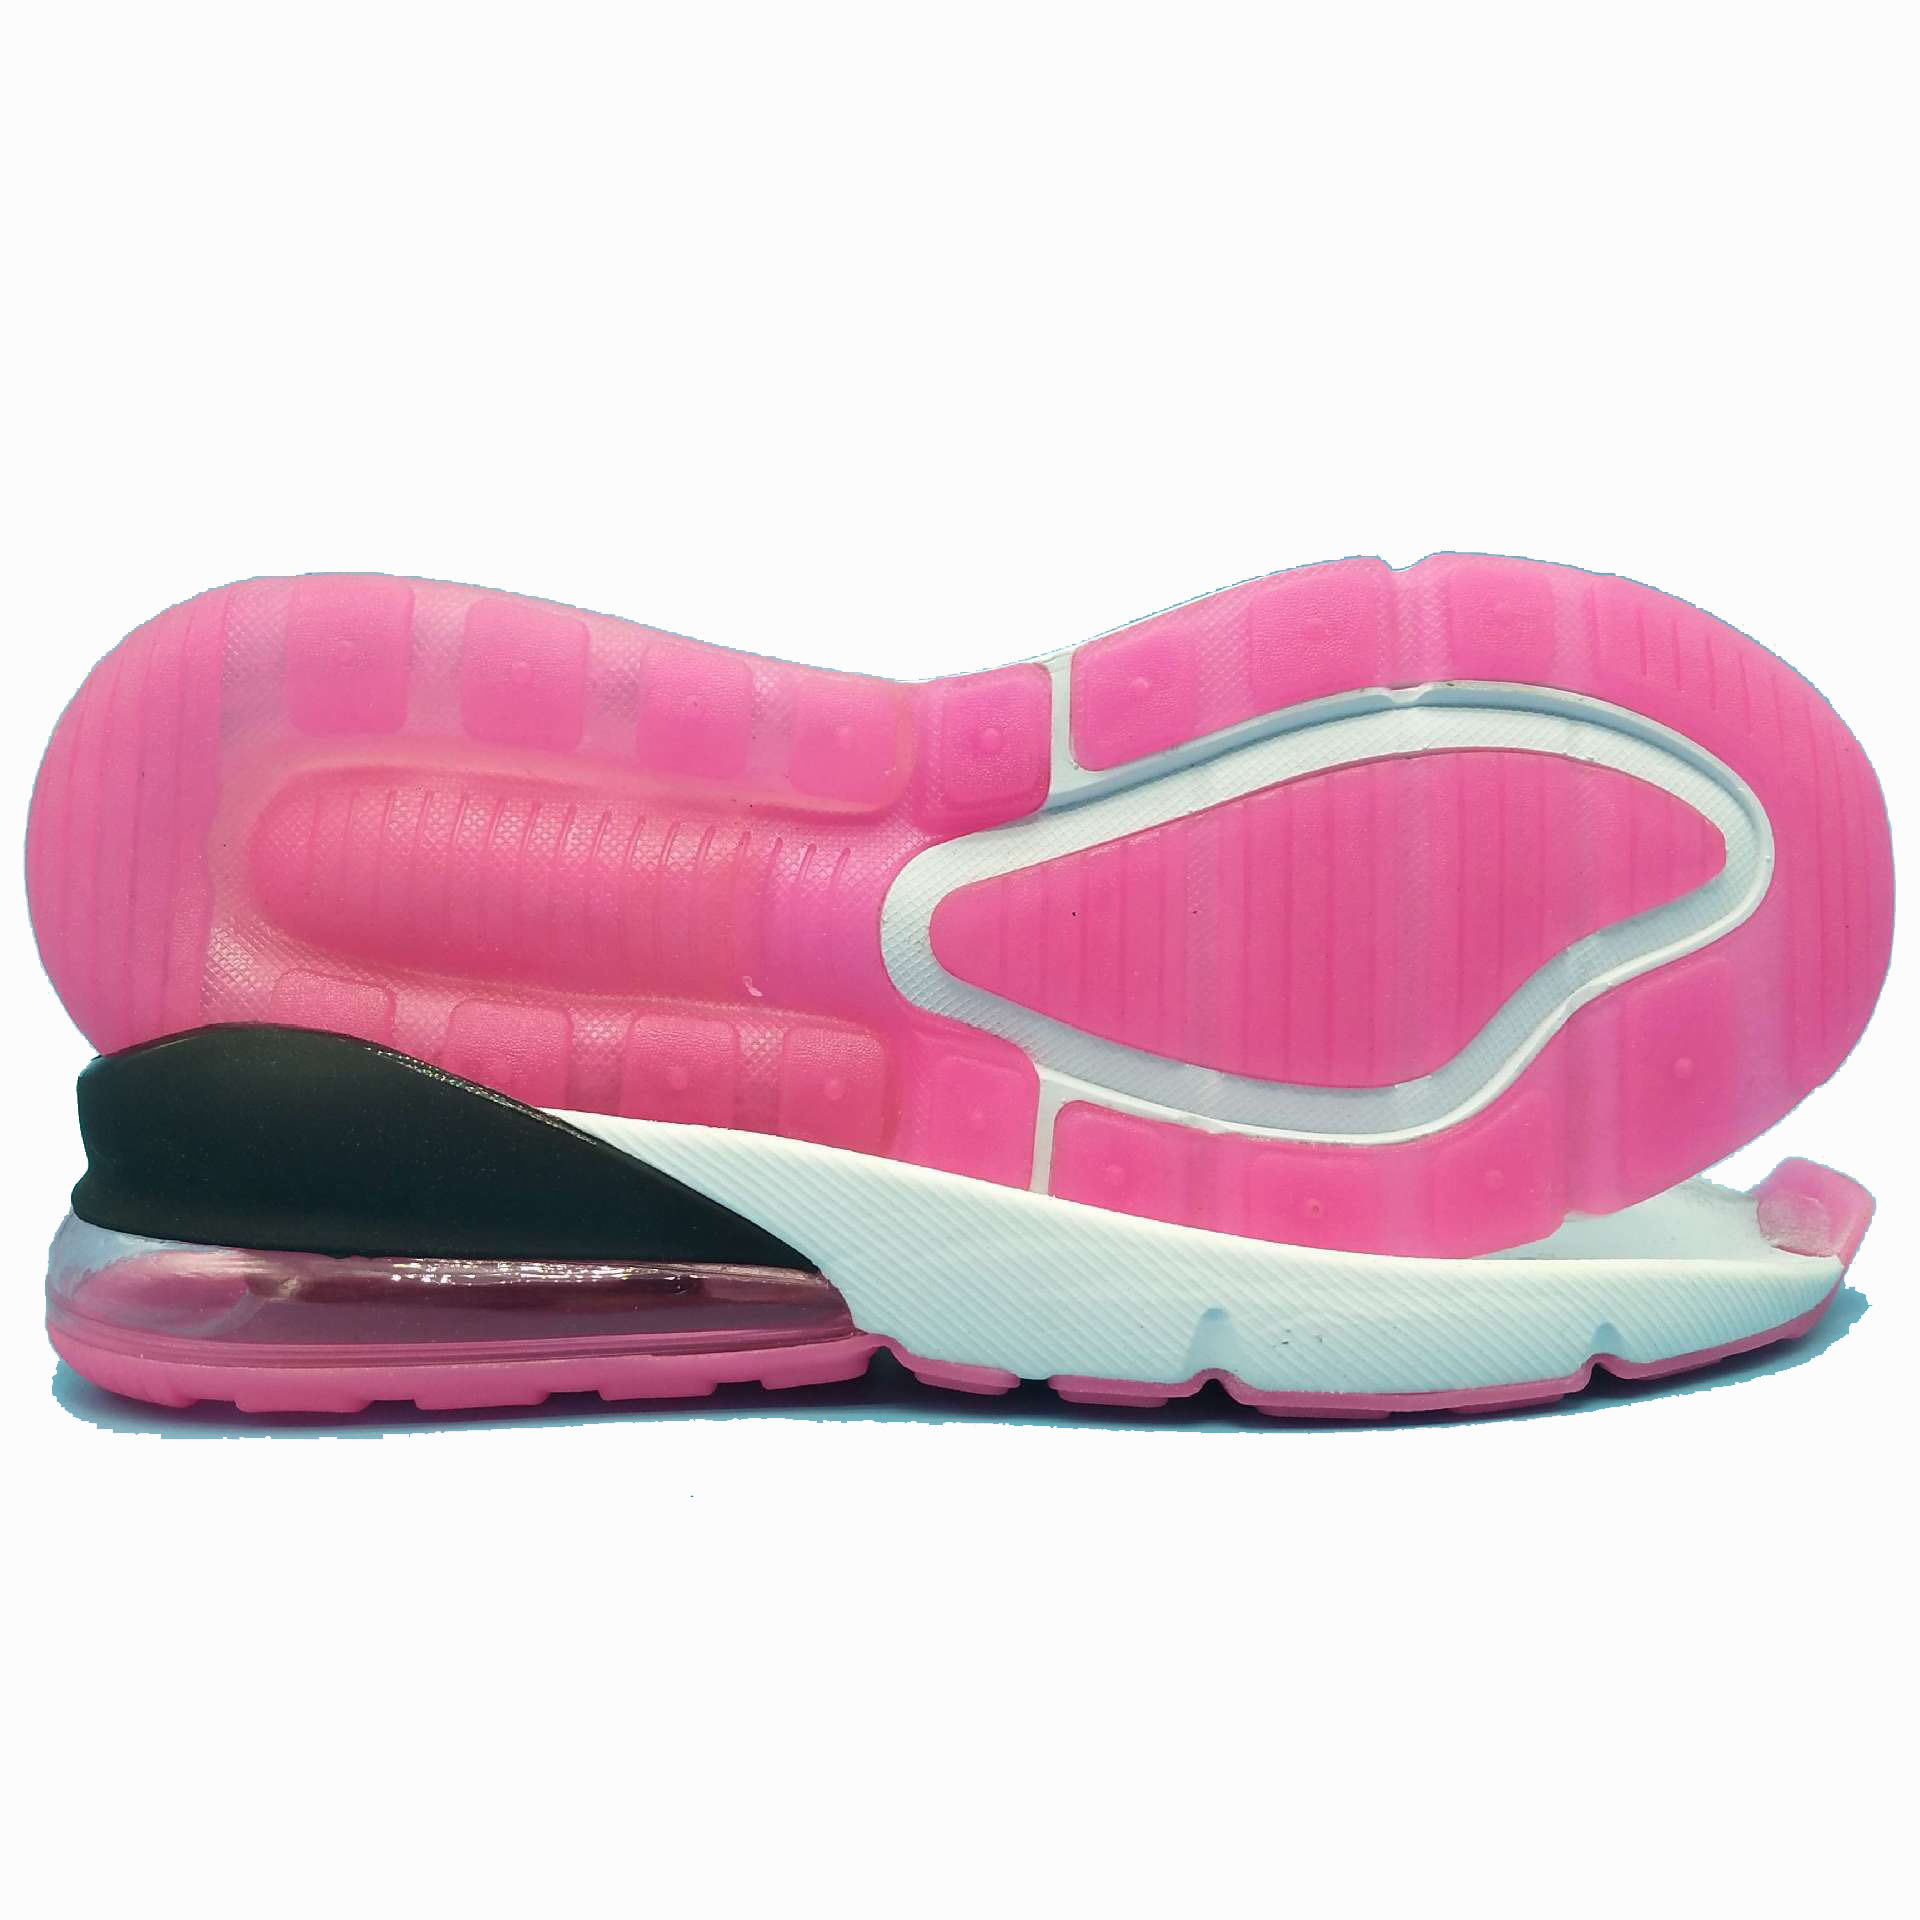 Womens and mens leisure sports insole cushioning insole for shoes...